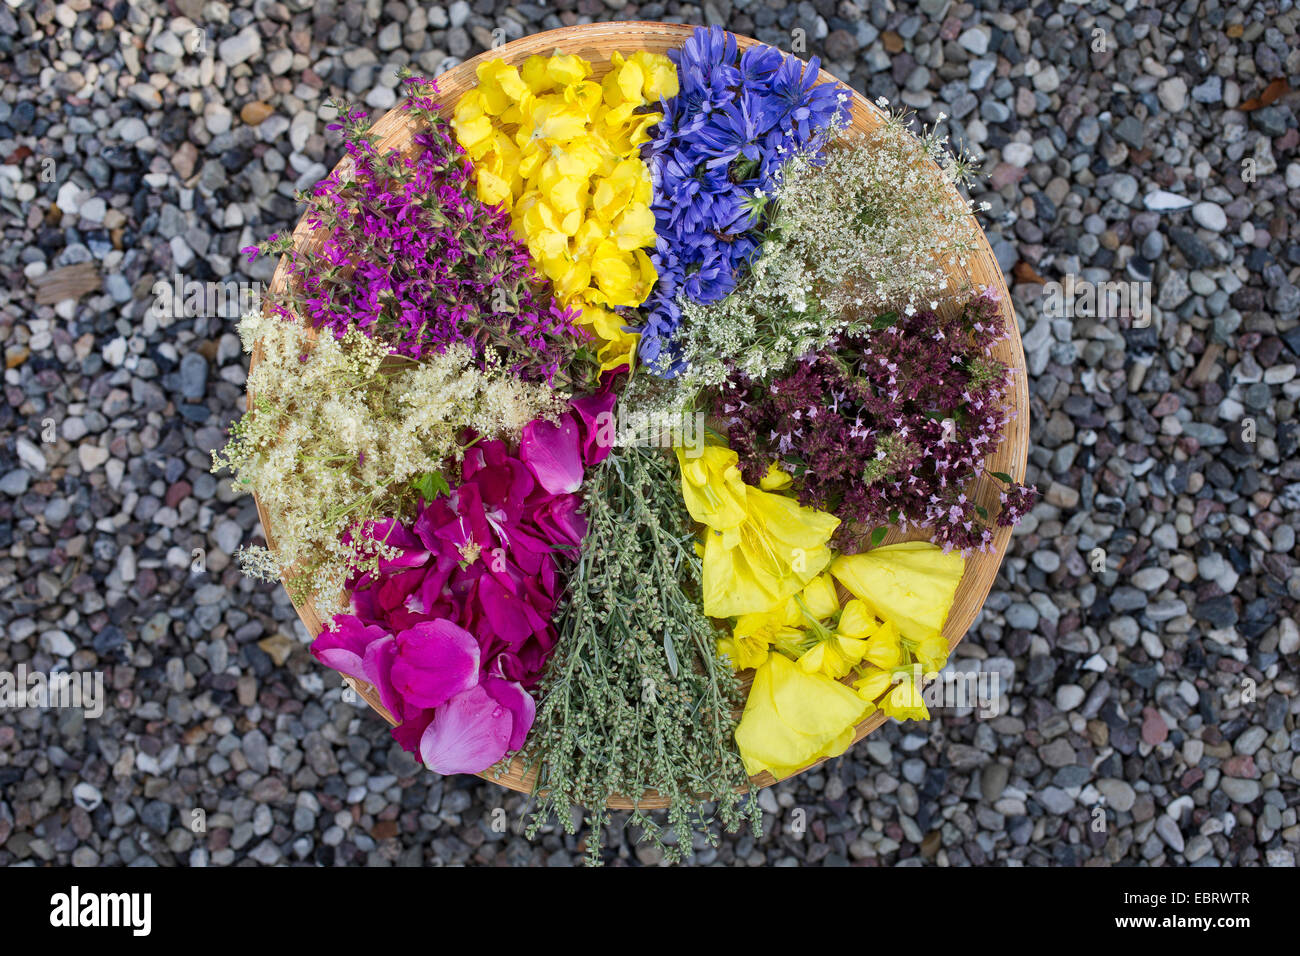 sorted blossoms drying on a plate Stock Photo